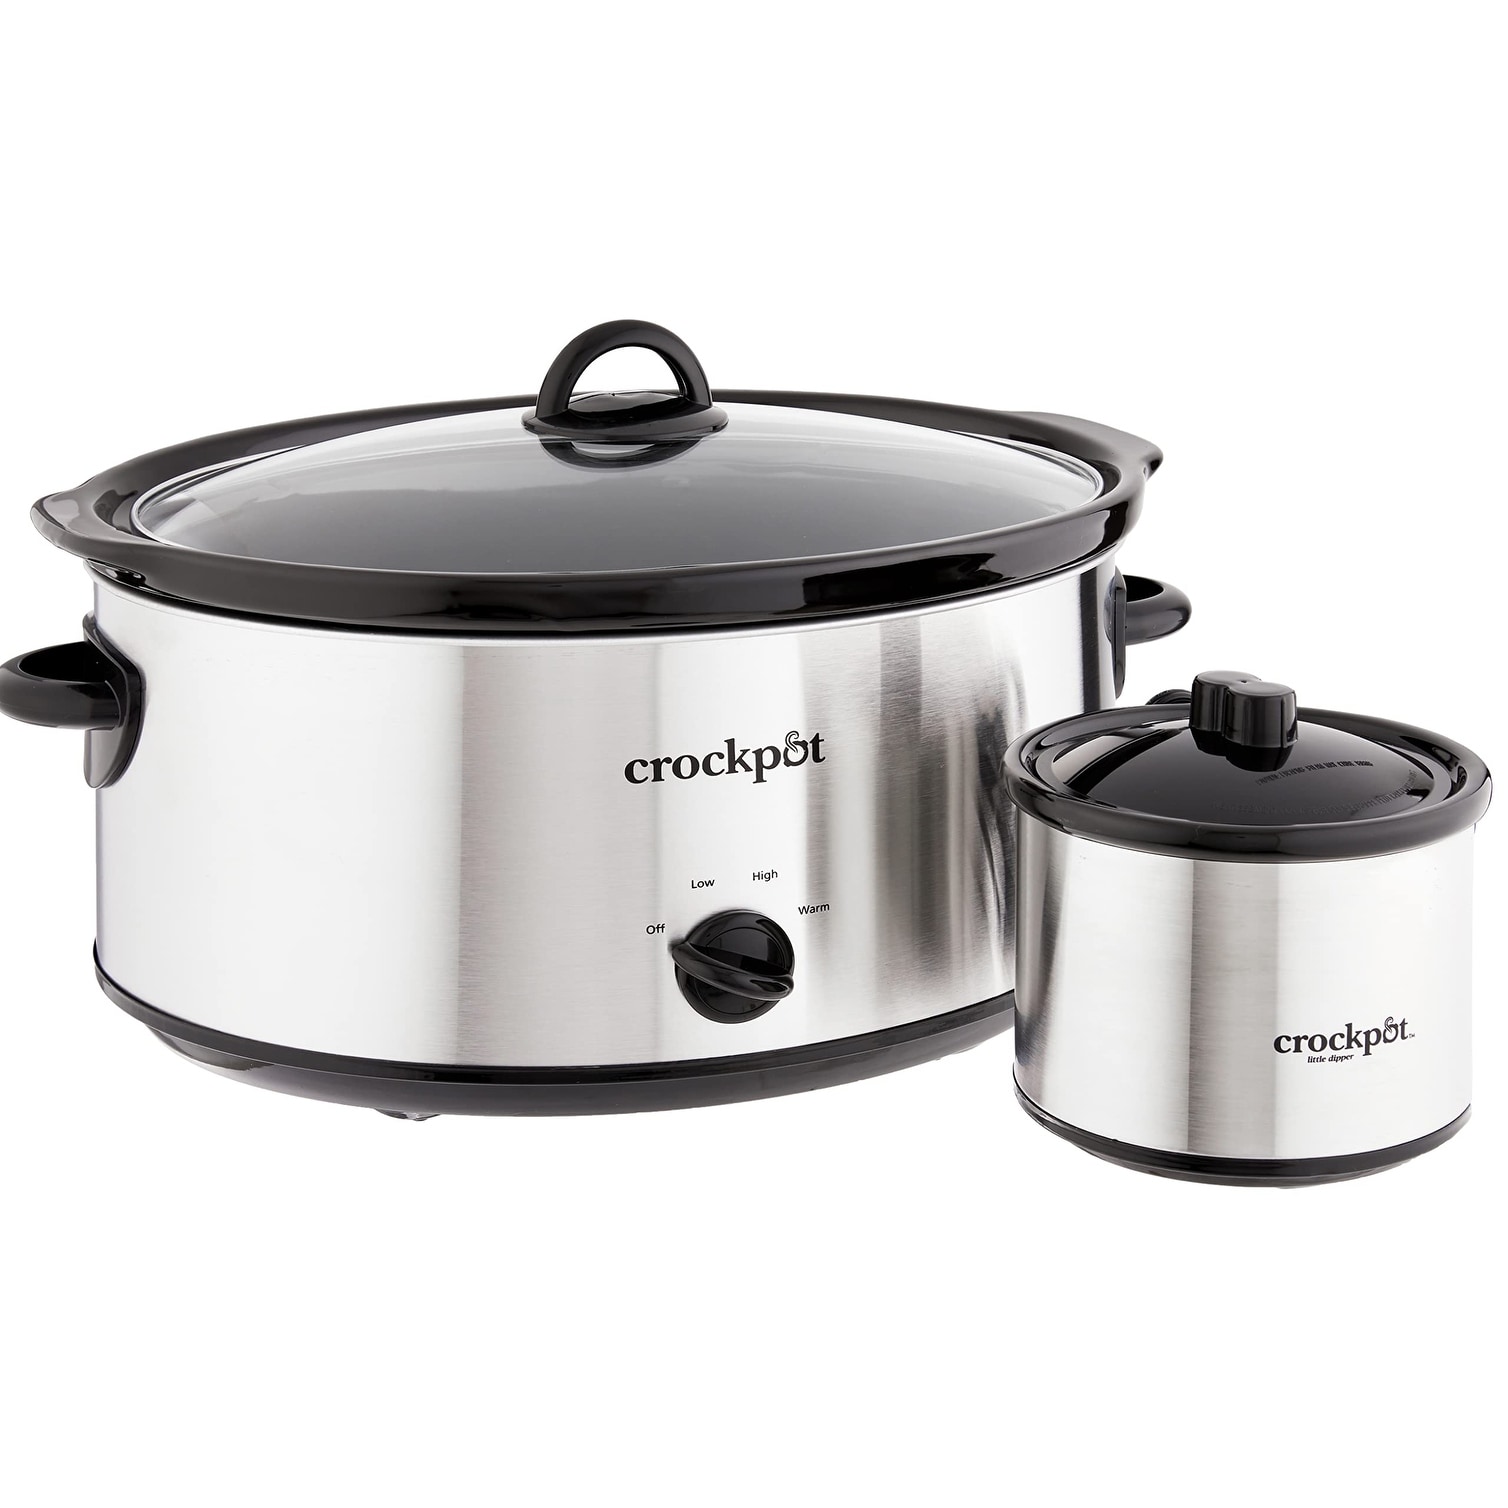 Large 8 Quart Slow Cooker with Small Mini 16 Ounce Portable Food